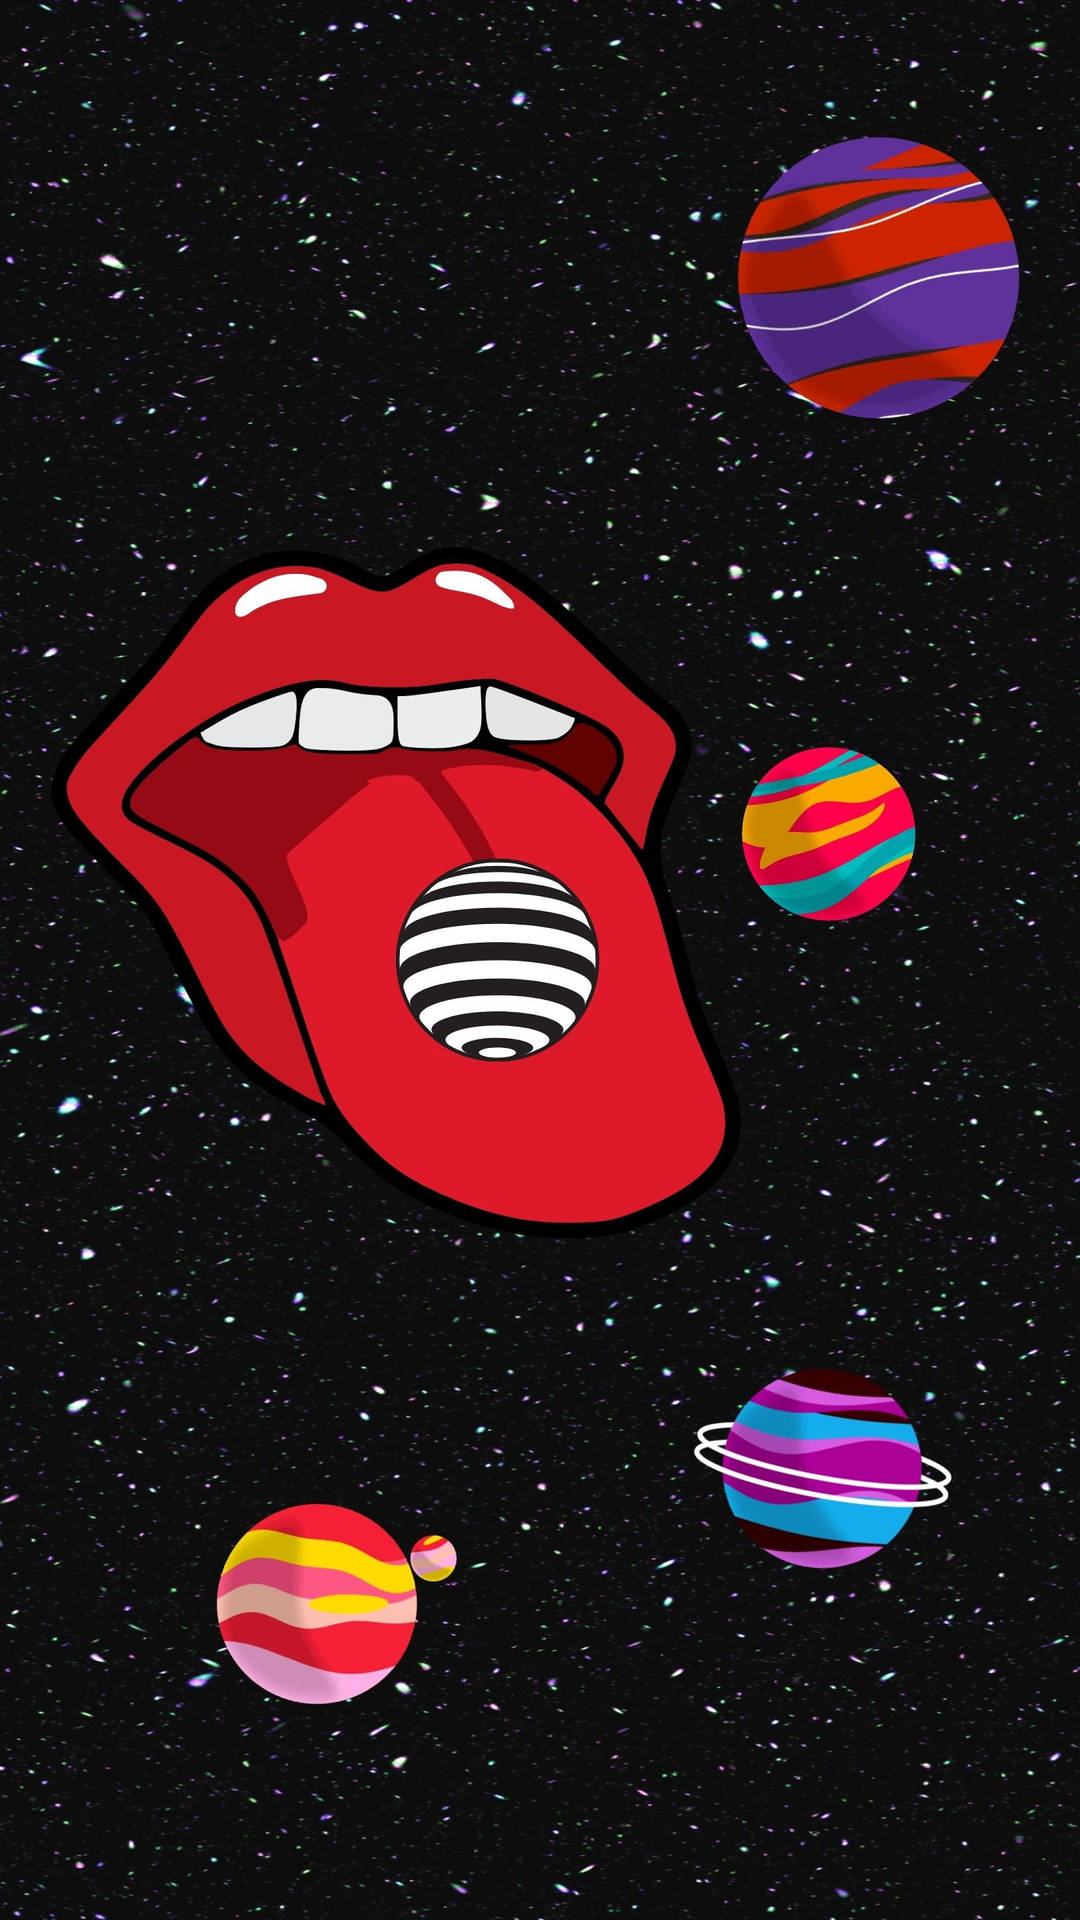 Tongue Sticking Out 70s Retro Aesthetic Wallpaper